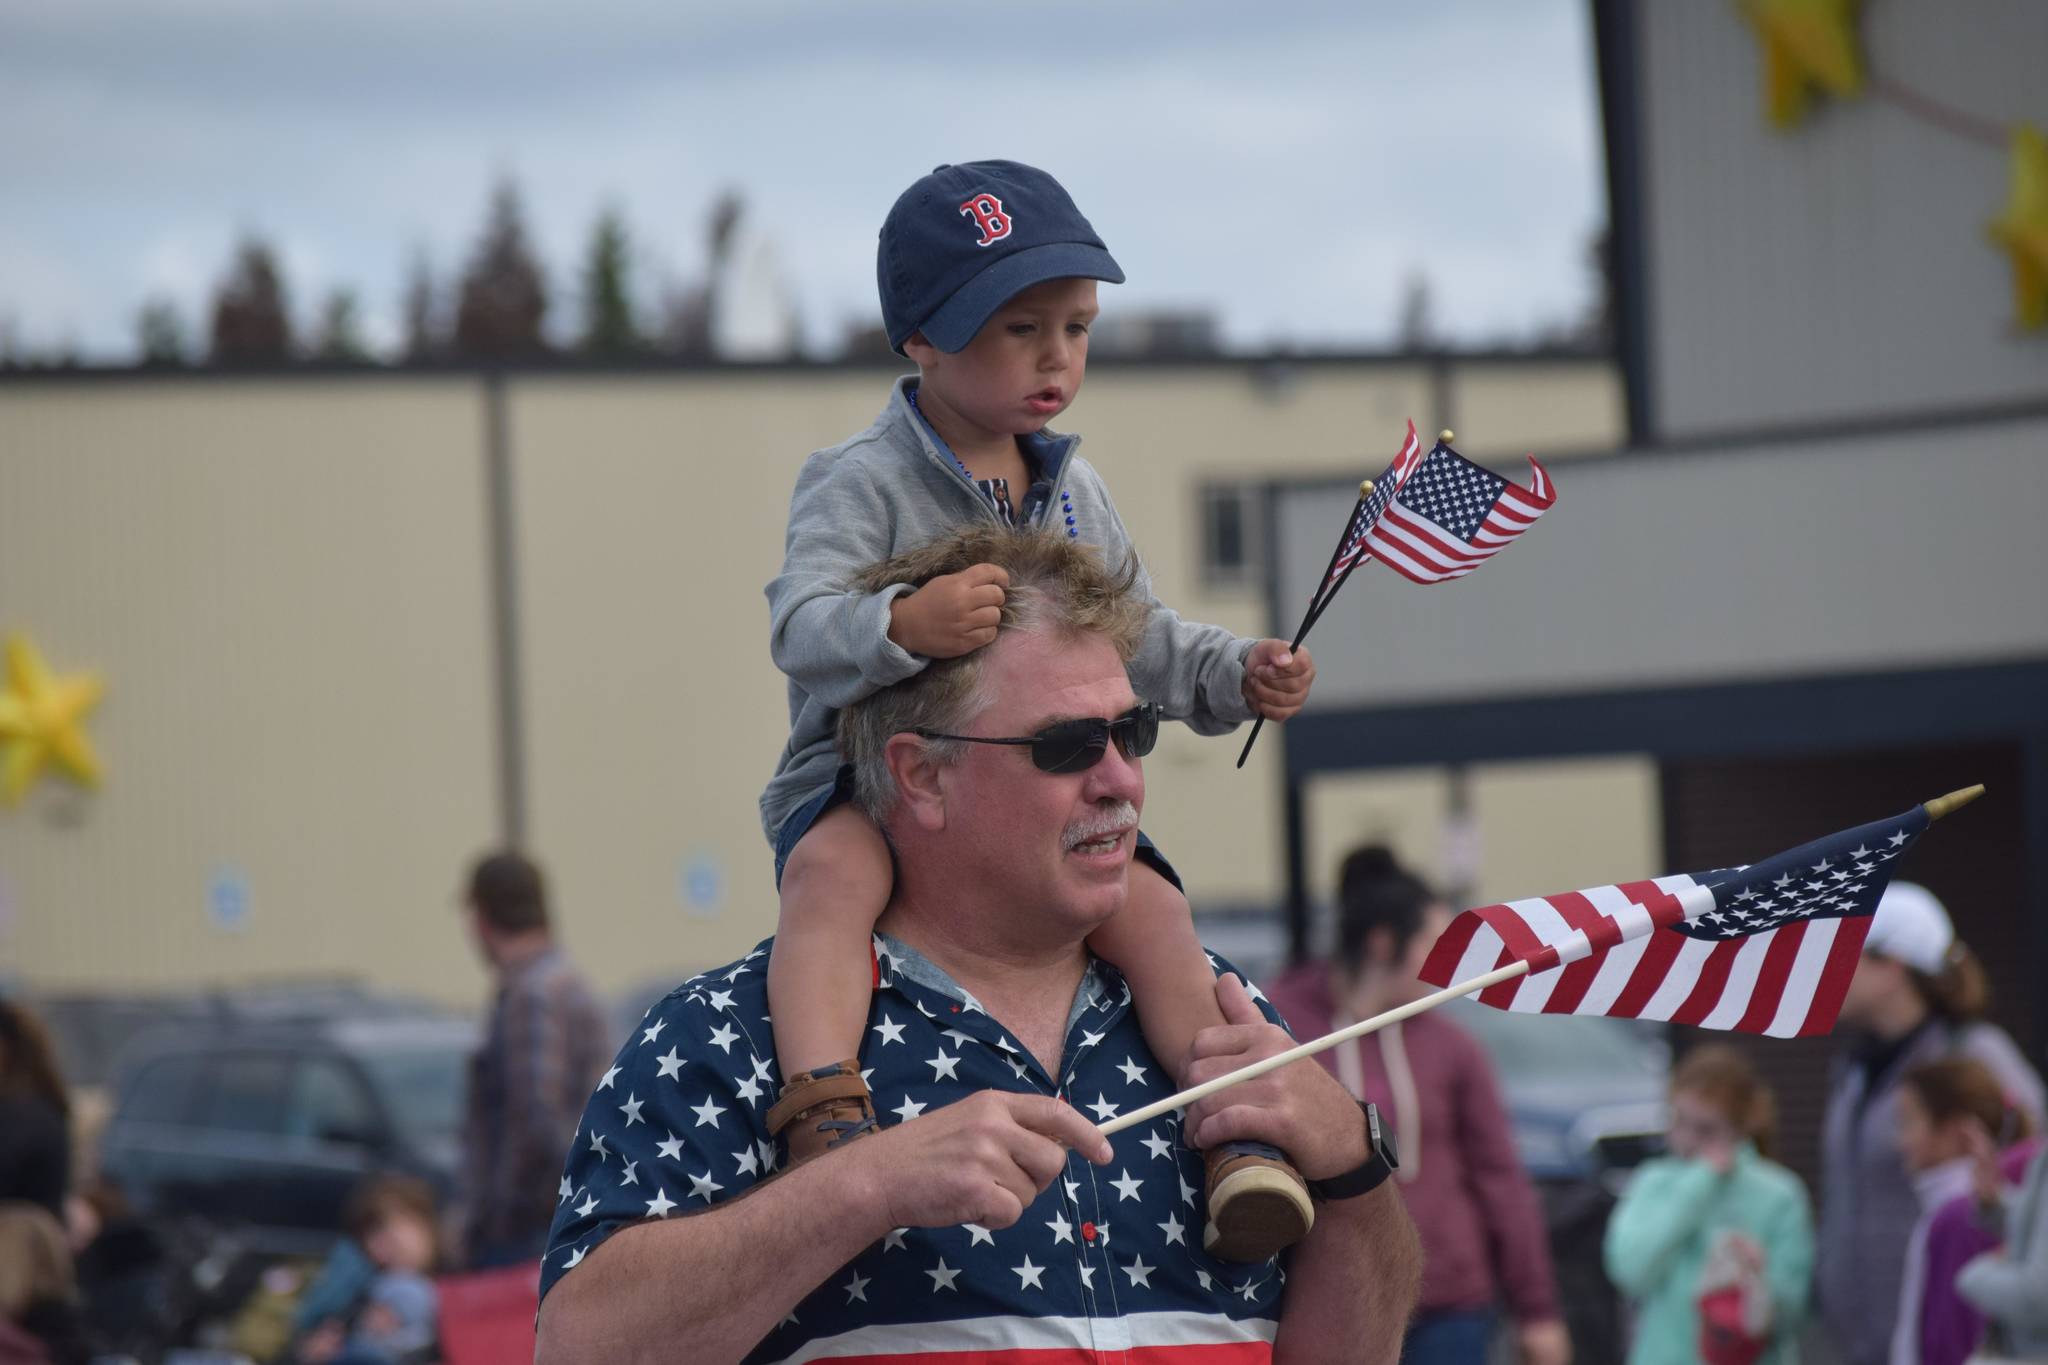 Community members affiliated with local organizations participate in Kenai’s annual Fourth of July parade on July 4, 2021. (Camille Botello / Peninsula Clarion)